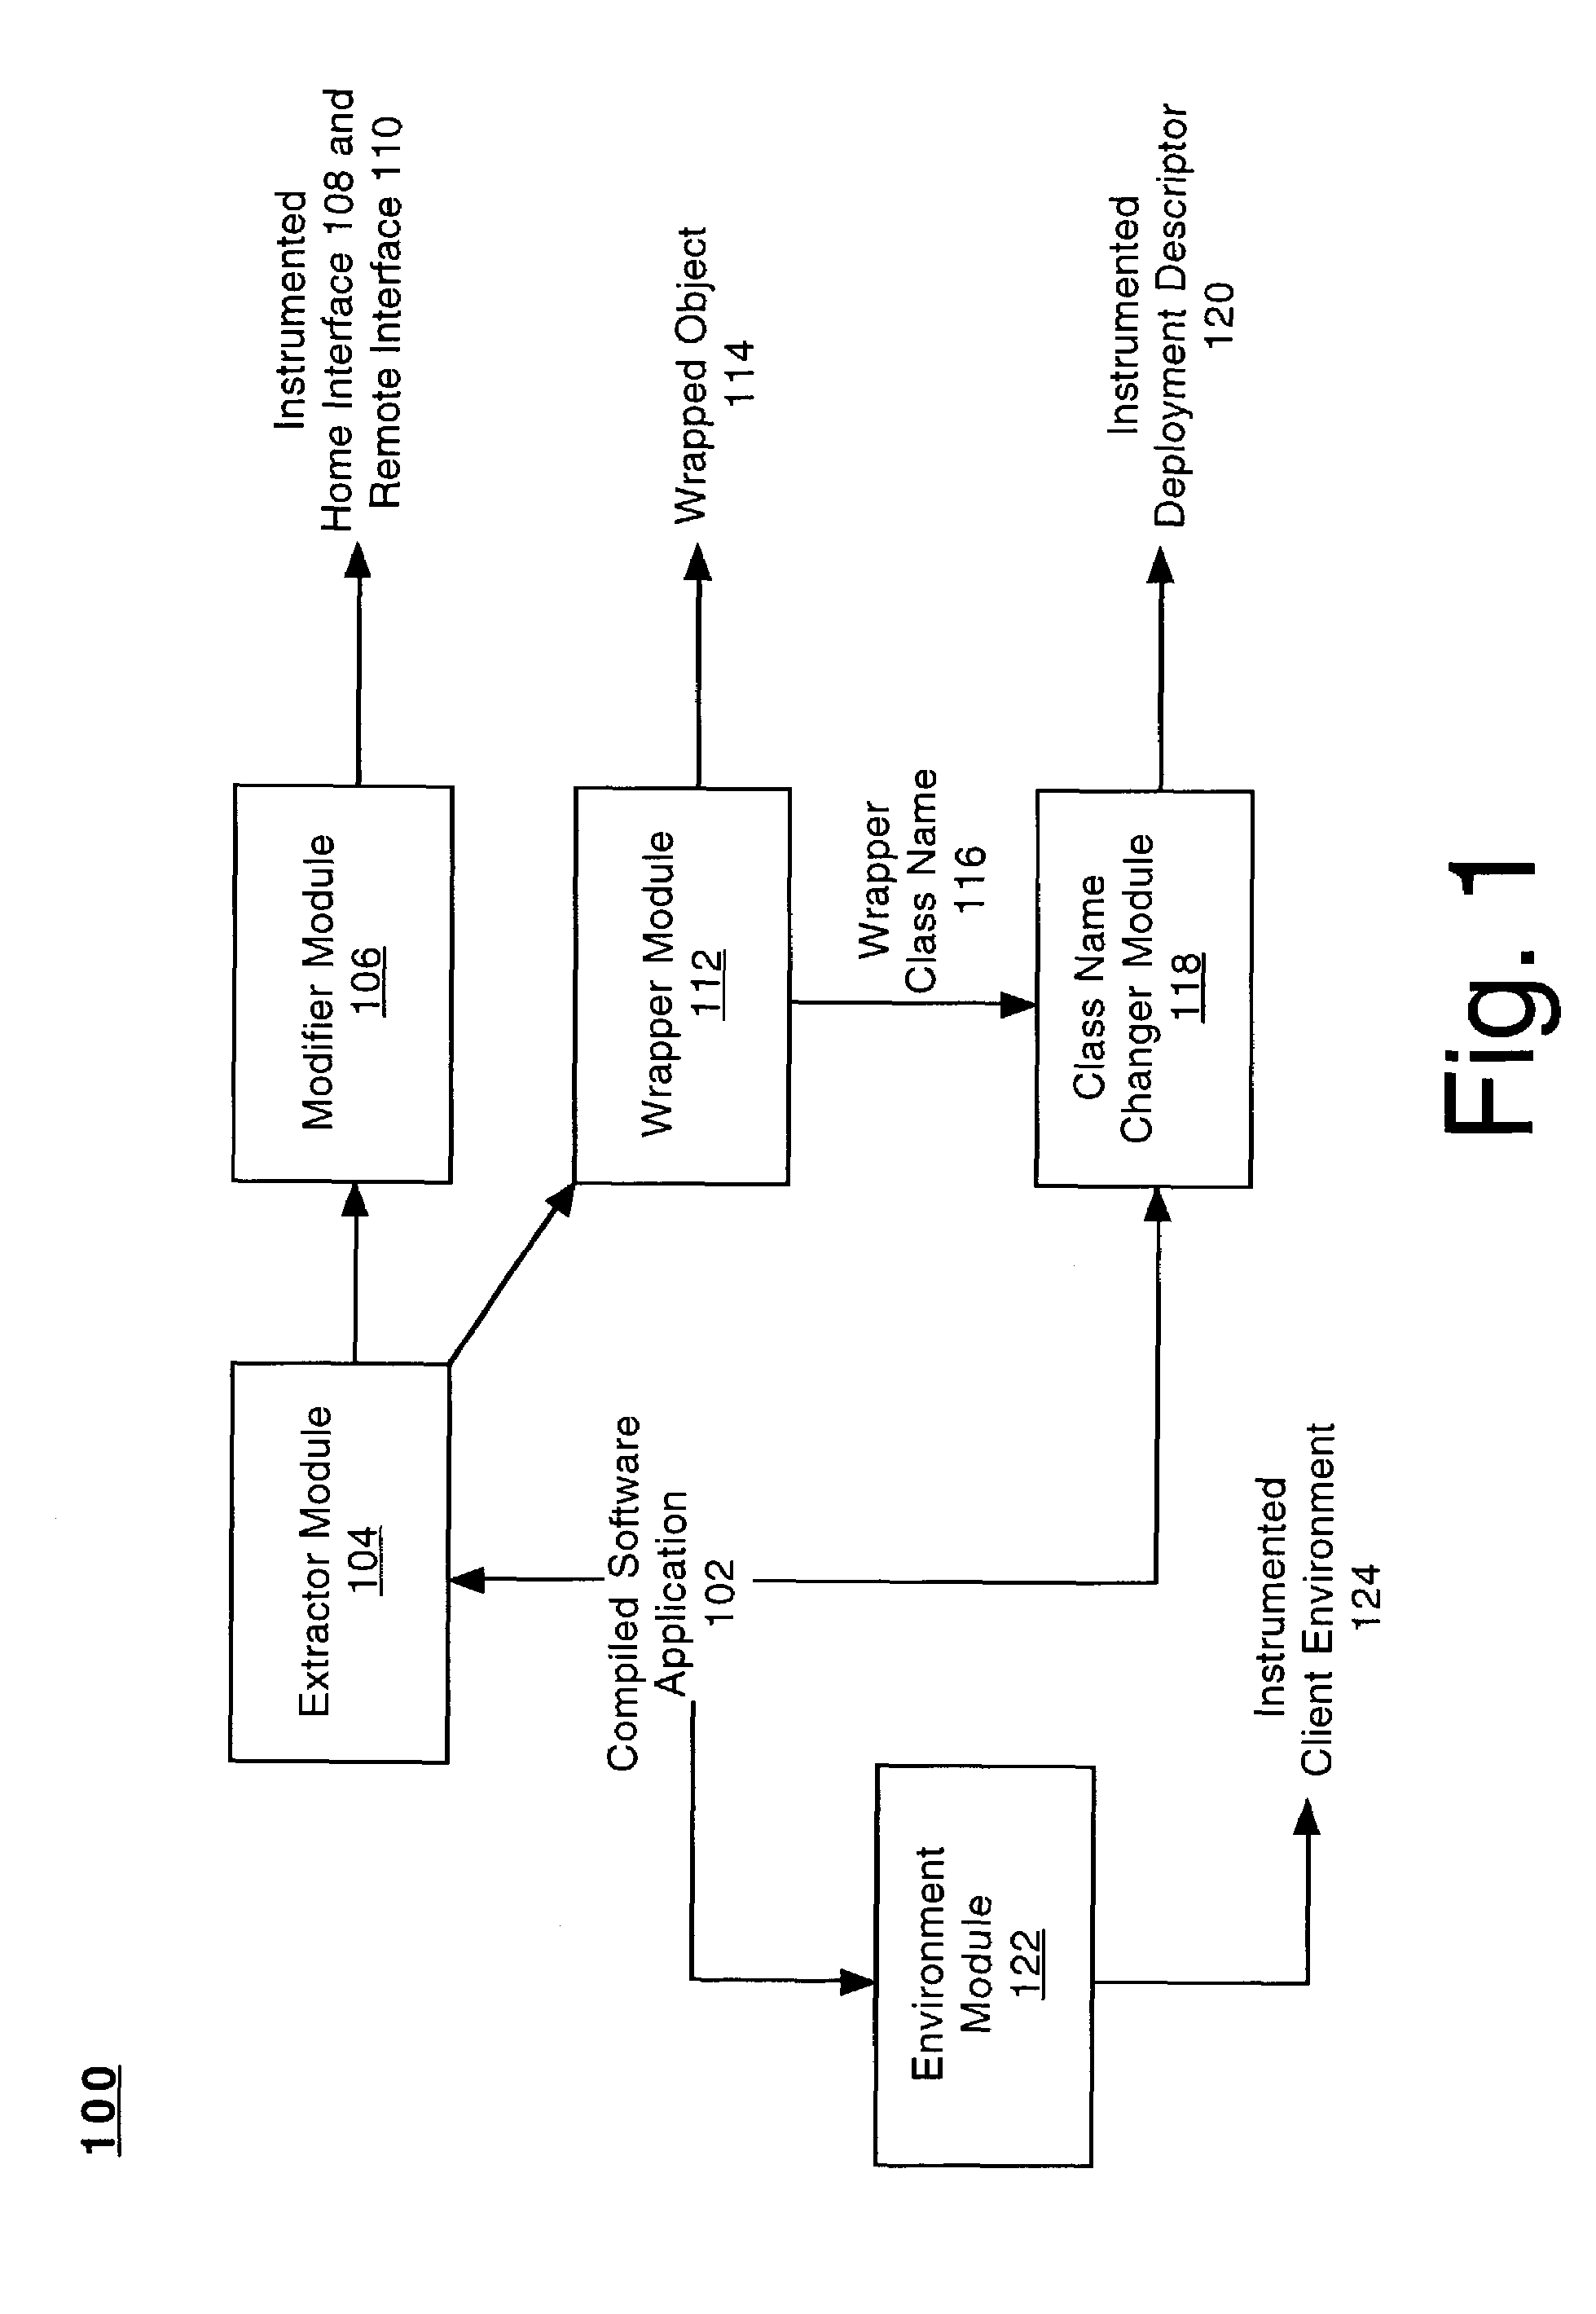 Instrumenting a software application that includes distributed object technology